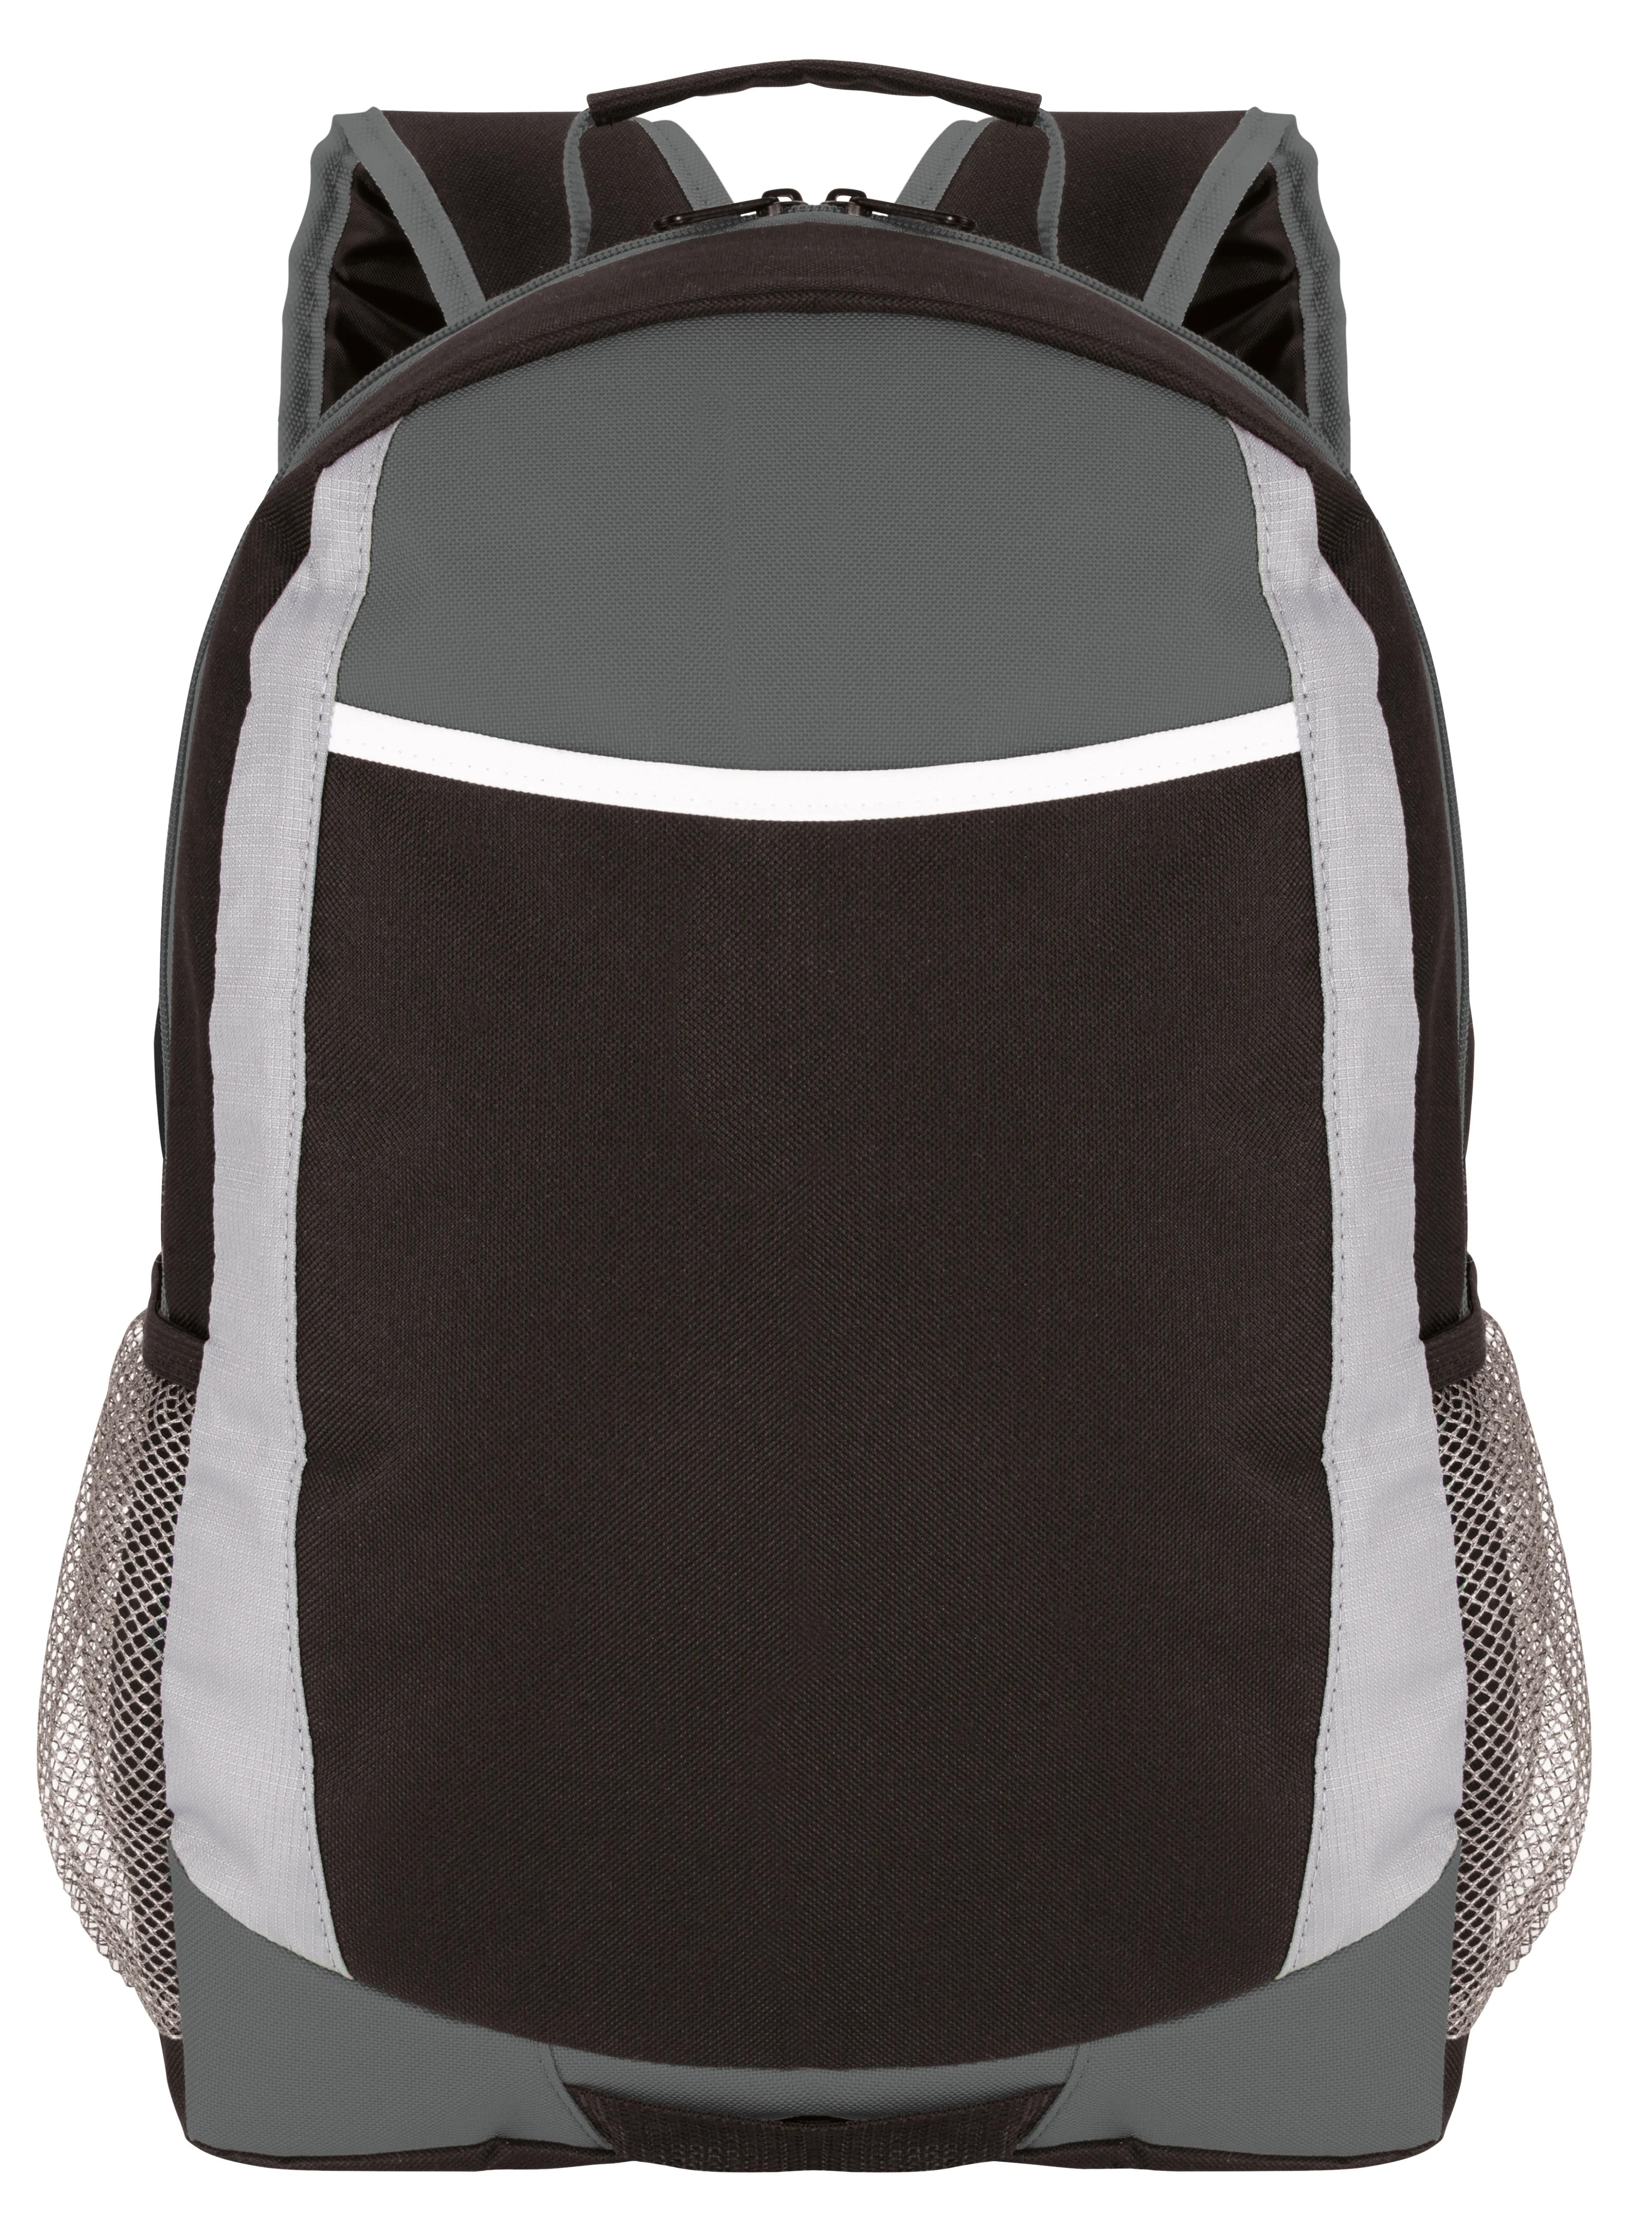 Primary Sport Backpack 4 of 14